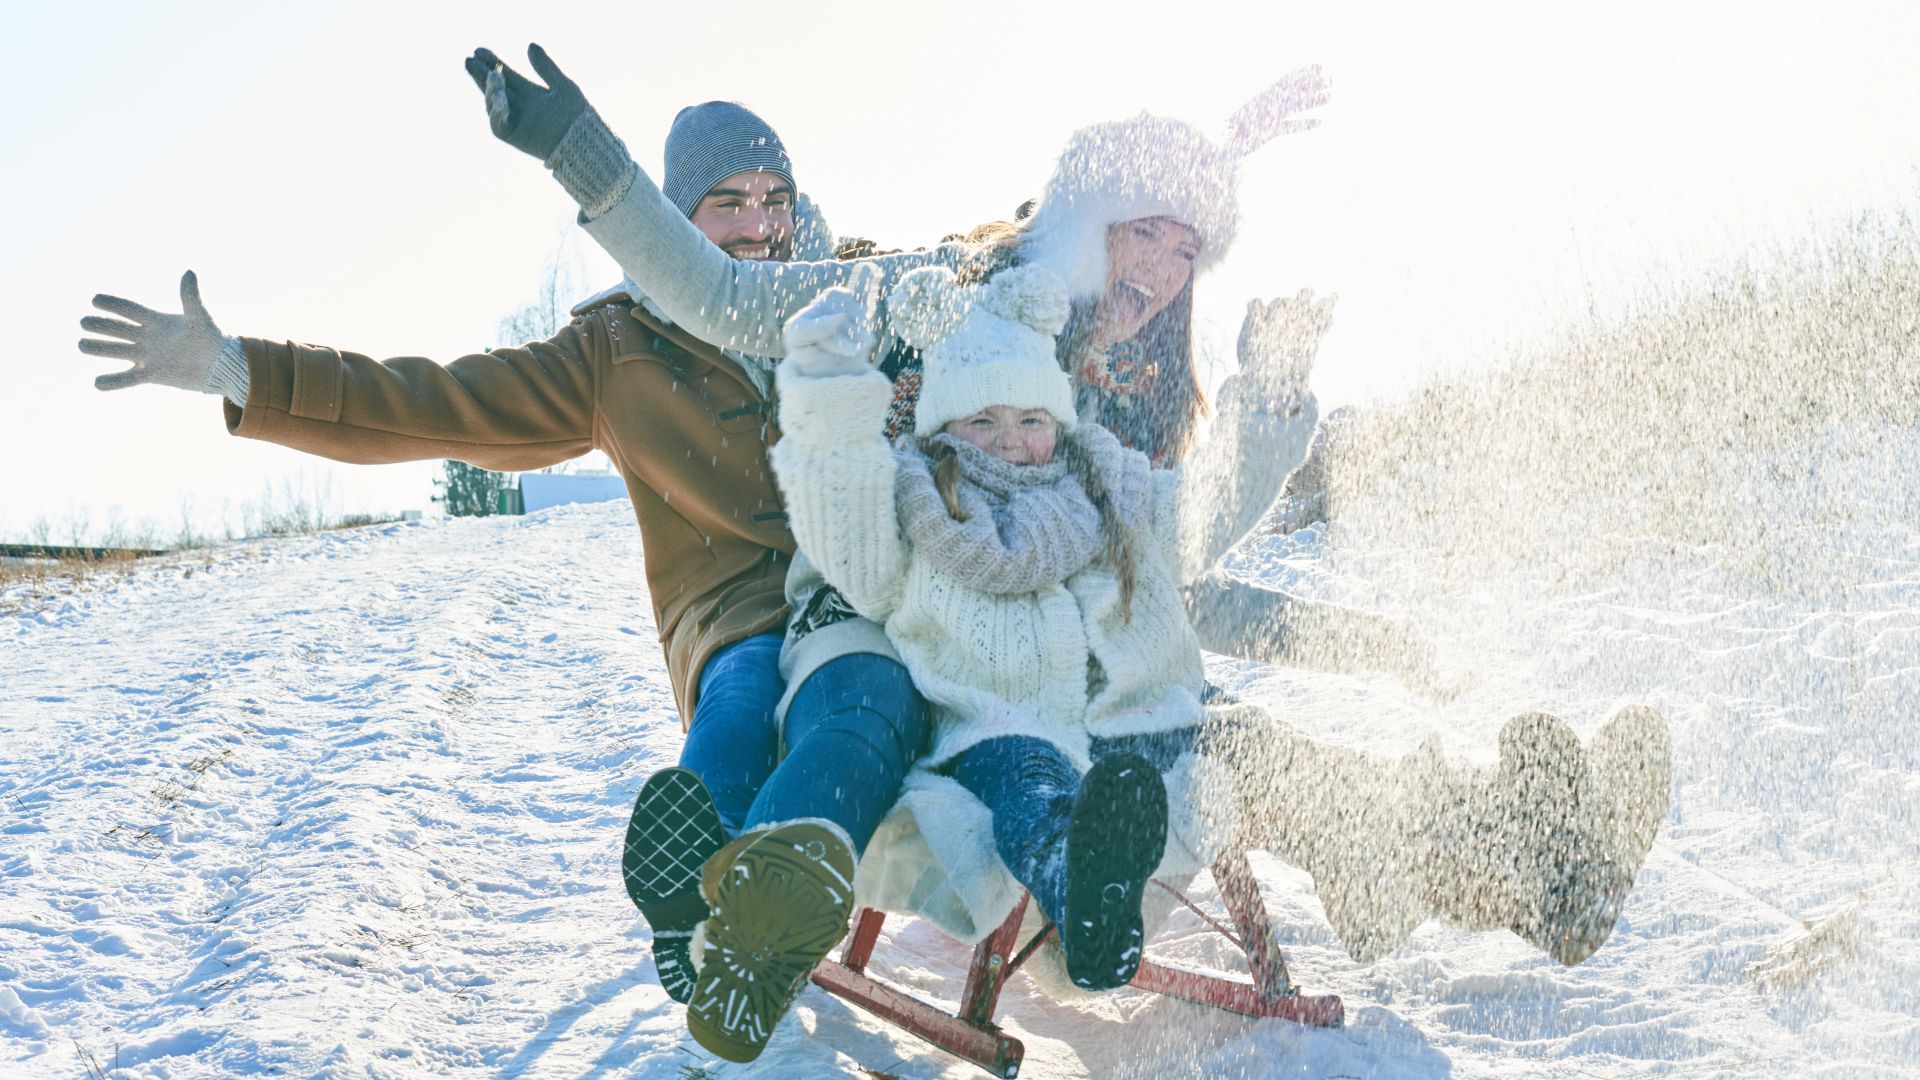 Happy Family Sledding On Snow Covered Field